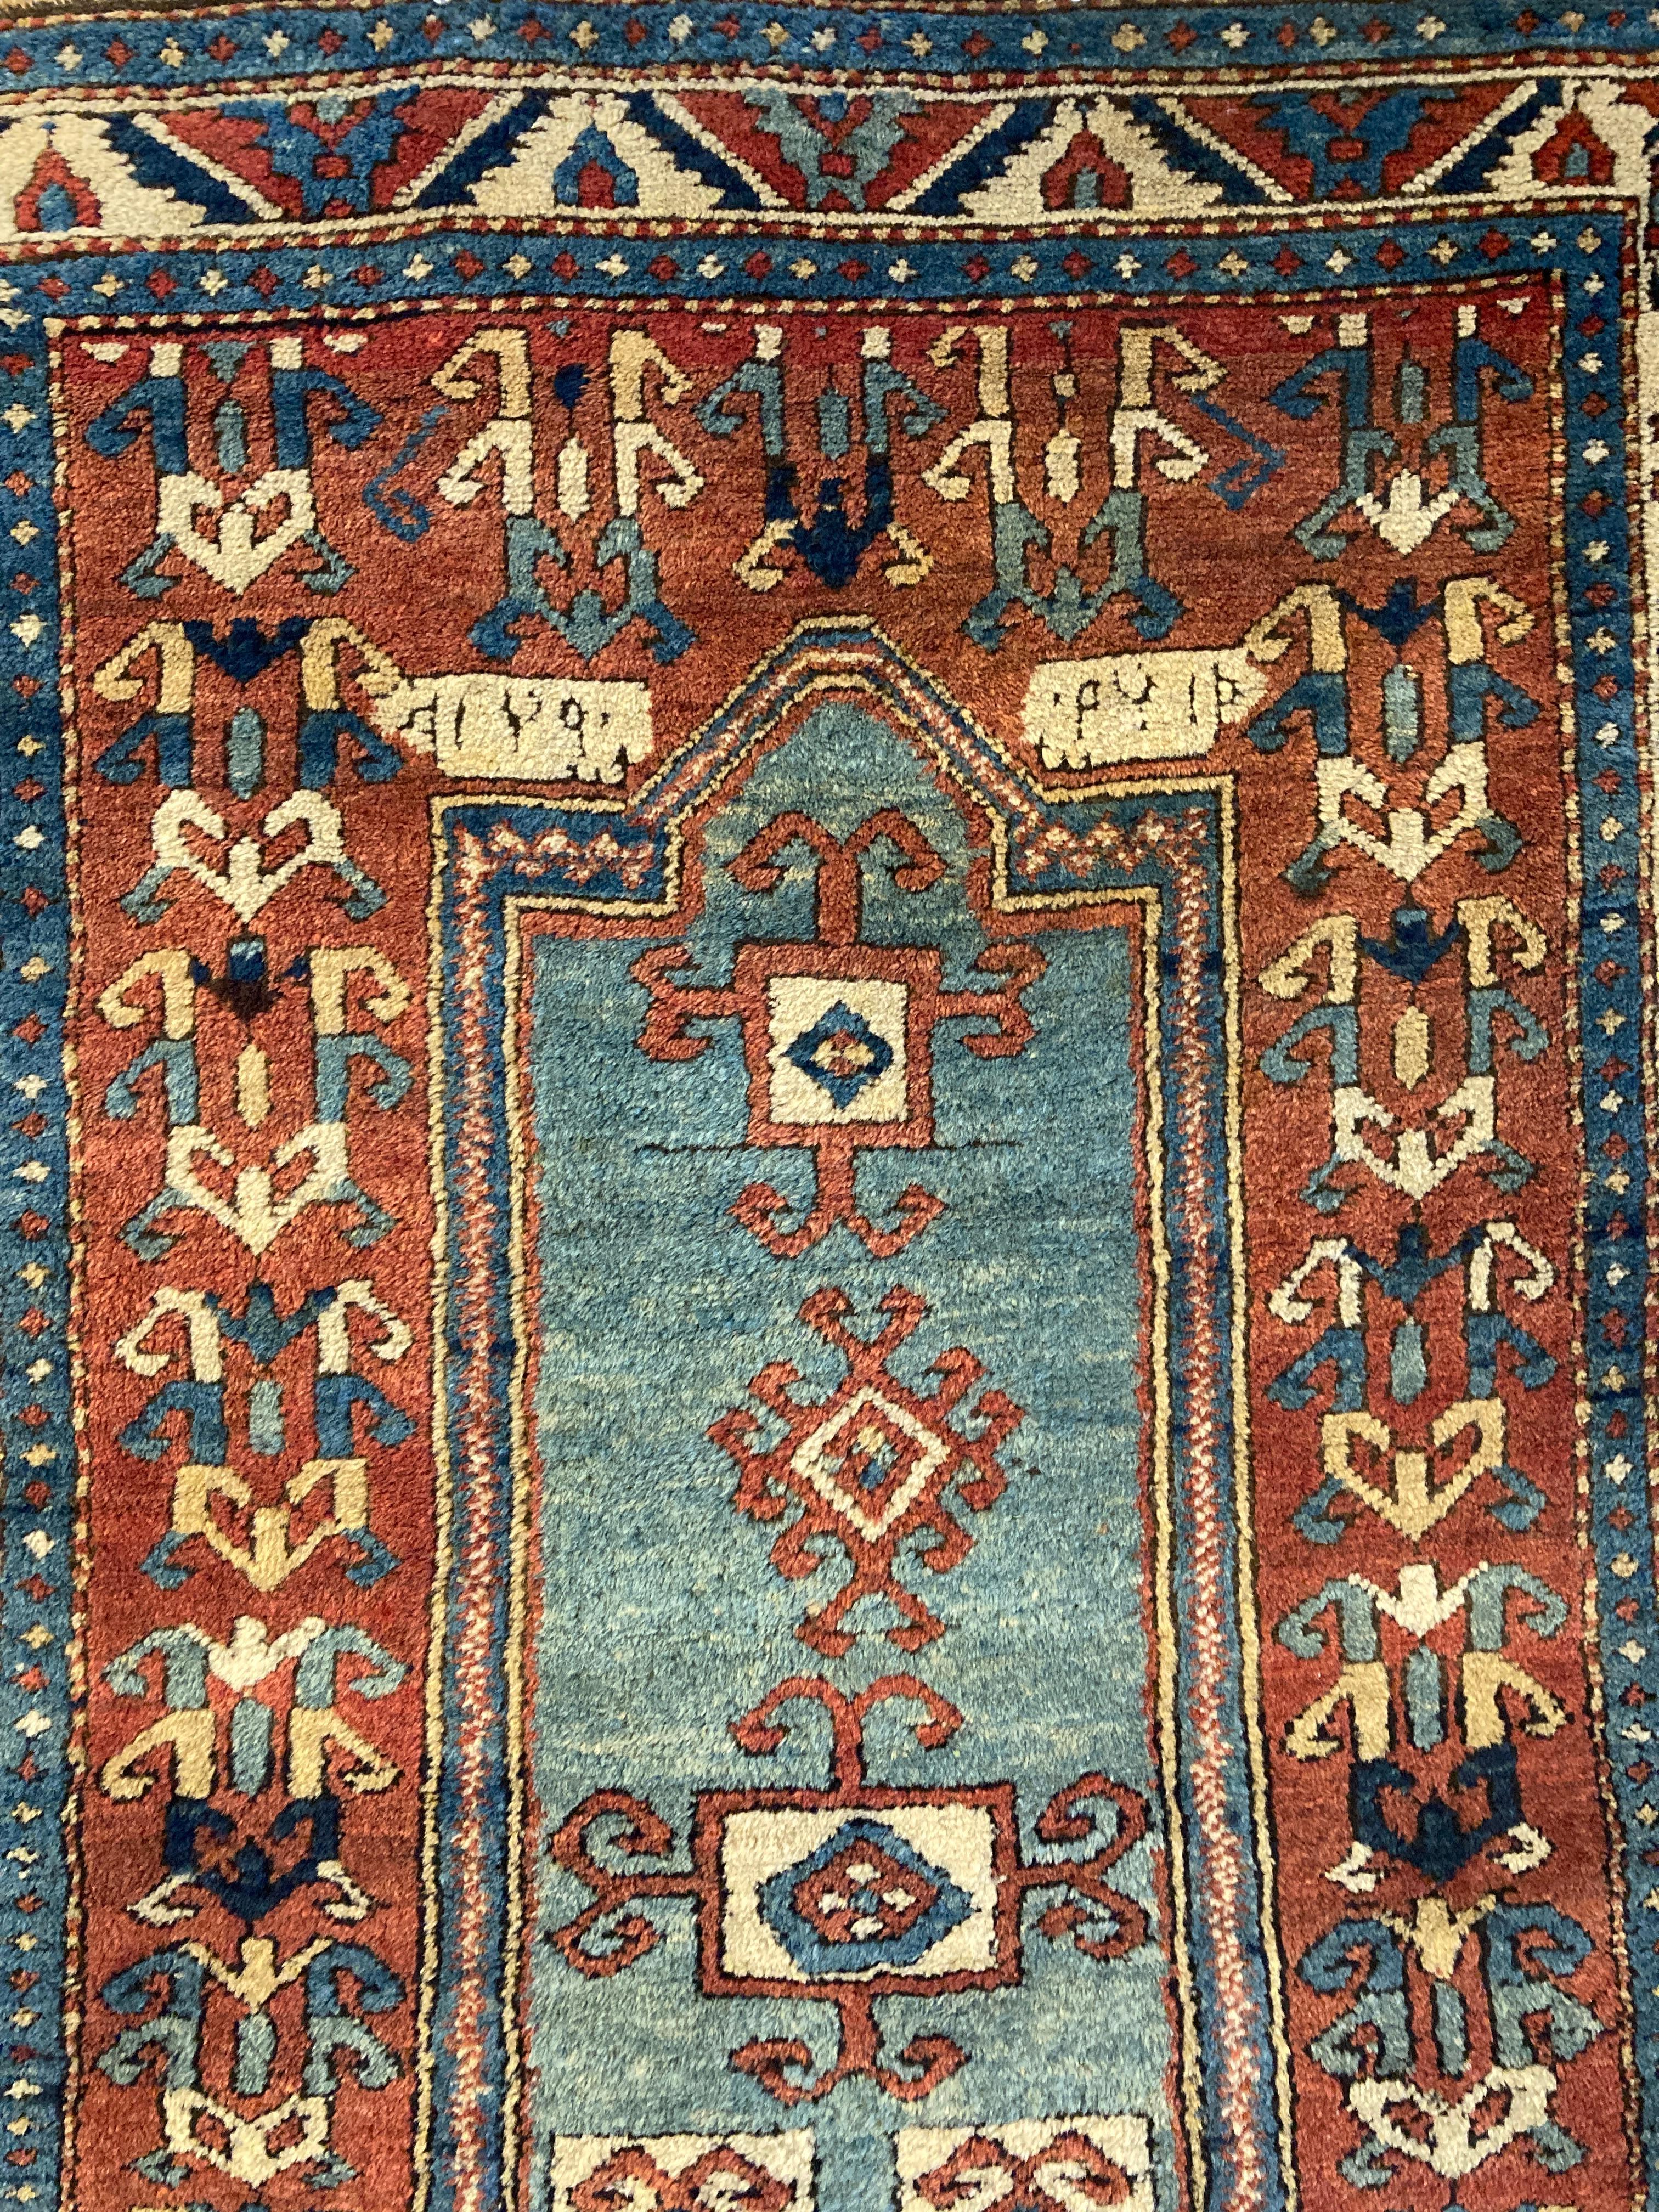 This antique Kazak rug, from the Caucasus region, is indeed a very rare find. It is dated using the Islamic calendar (converts to 1874) and has all the design attributes of rugs made in the Fachralo region. The pile is thick, full and supple, and